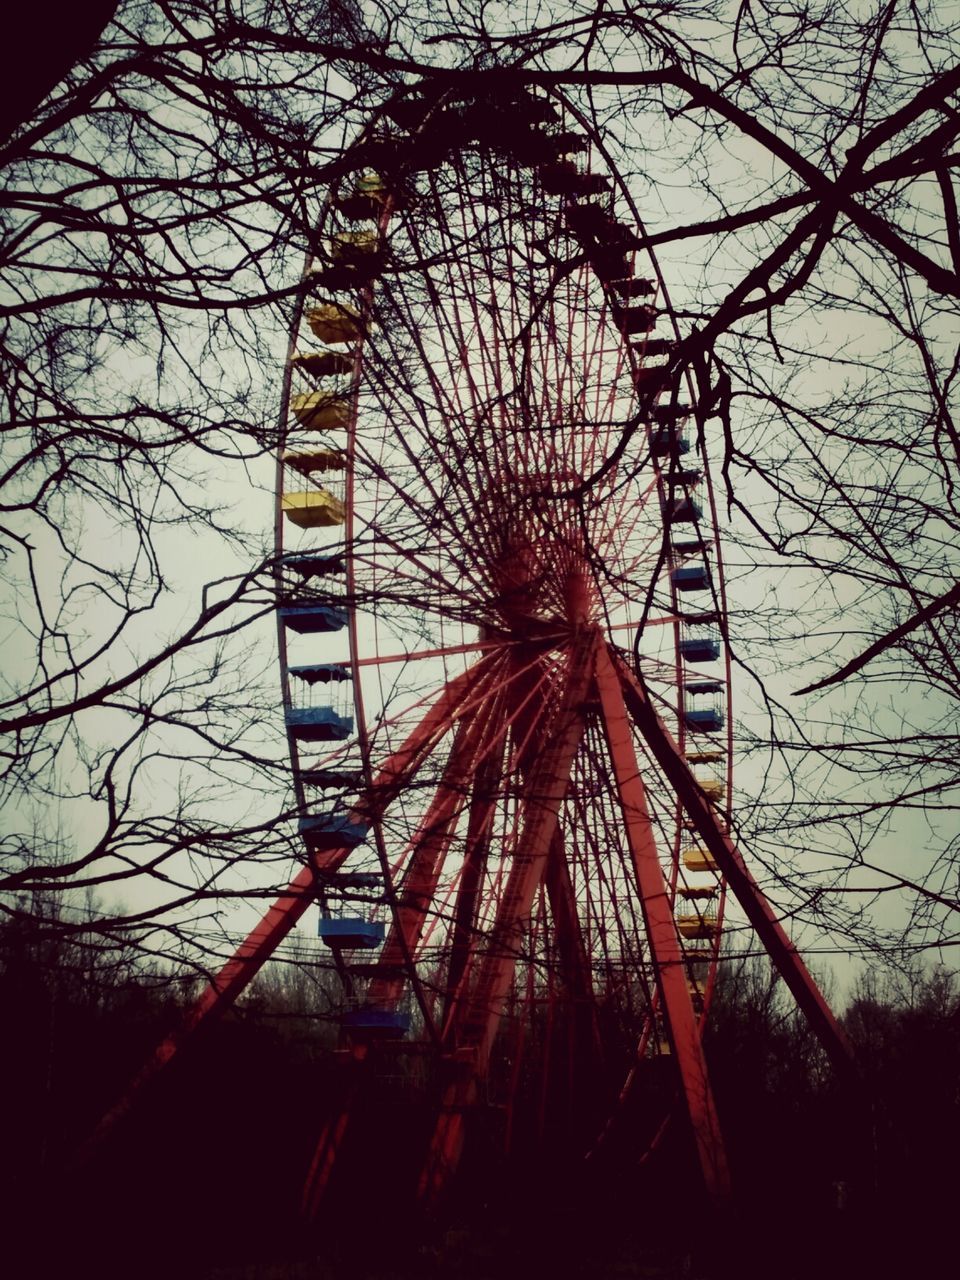 Low angle view of ferris wheel amidst bare trees against sky at dusk